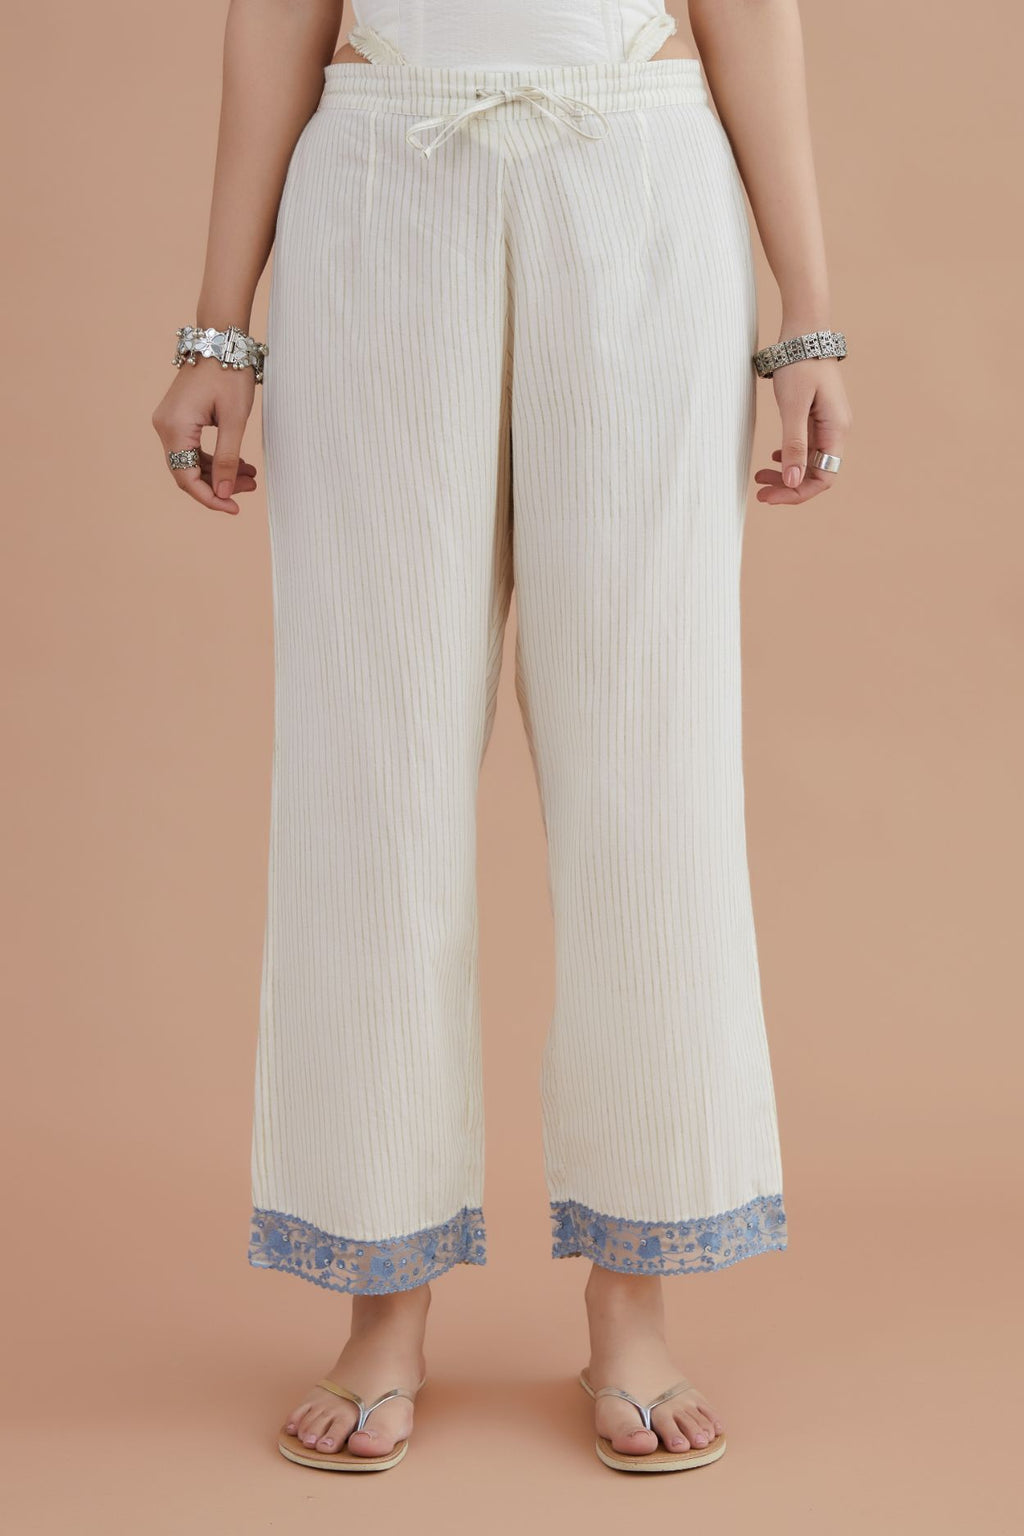 Off white straight pants detailed with blue embroidery at bottom.